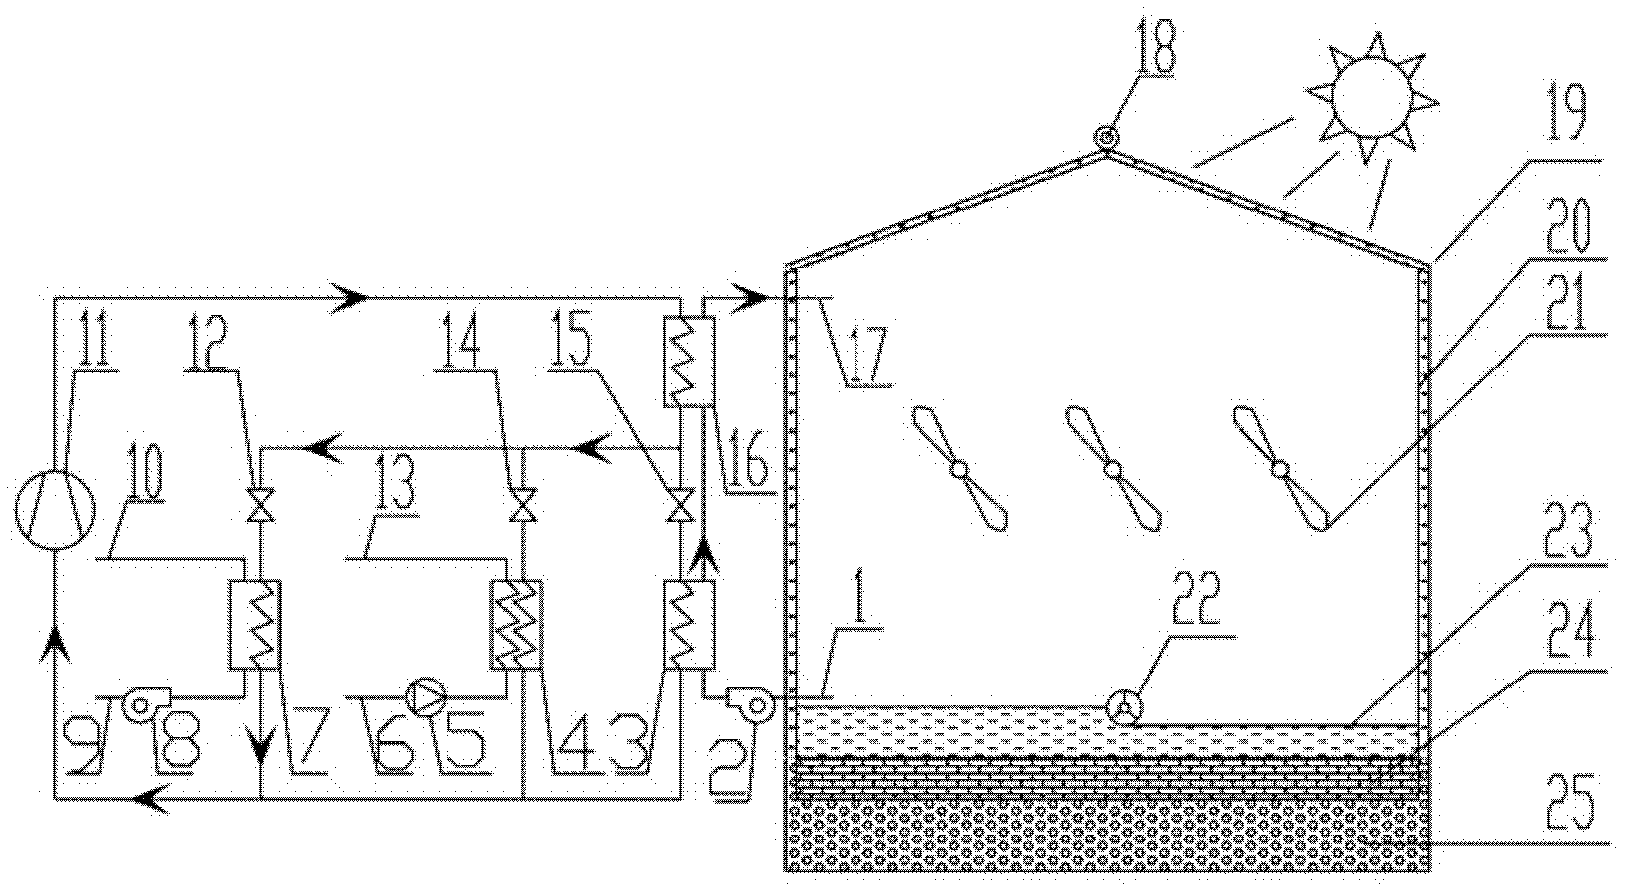 Sludge drying system of combined solar energy and multi-source heat pump